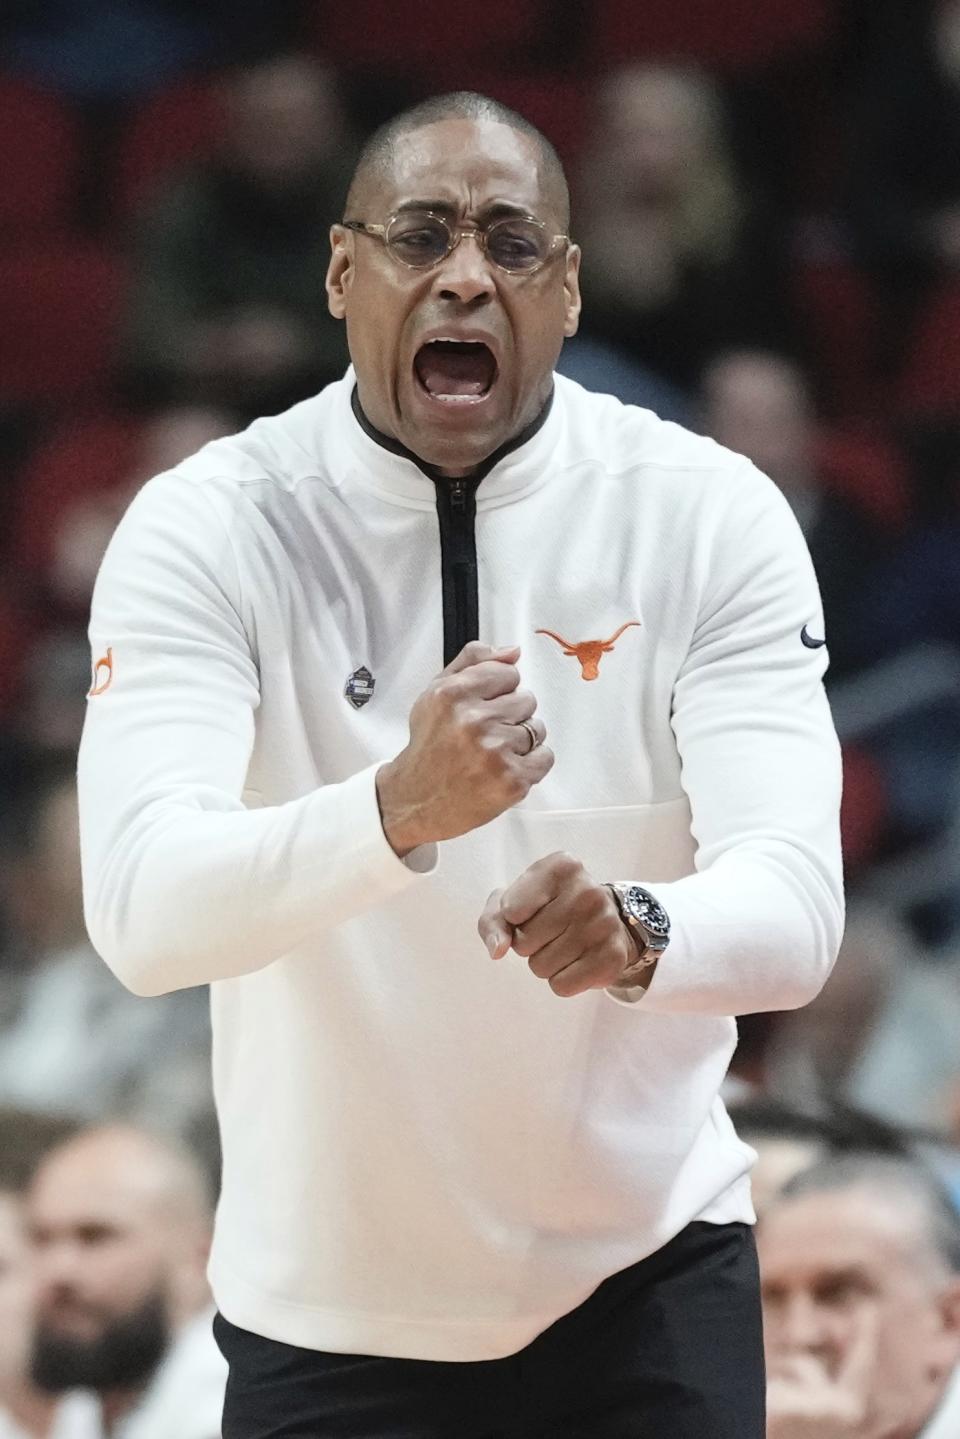 Texas head coach Rodney Terry reacts during the first half of a first-round college basketball game in the NCAA Tournament Thursday, March 16, 2023, in Des Moines, Iowa. (AP Photo/Morry Gash)